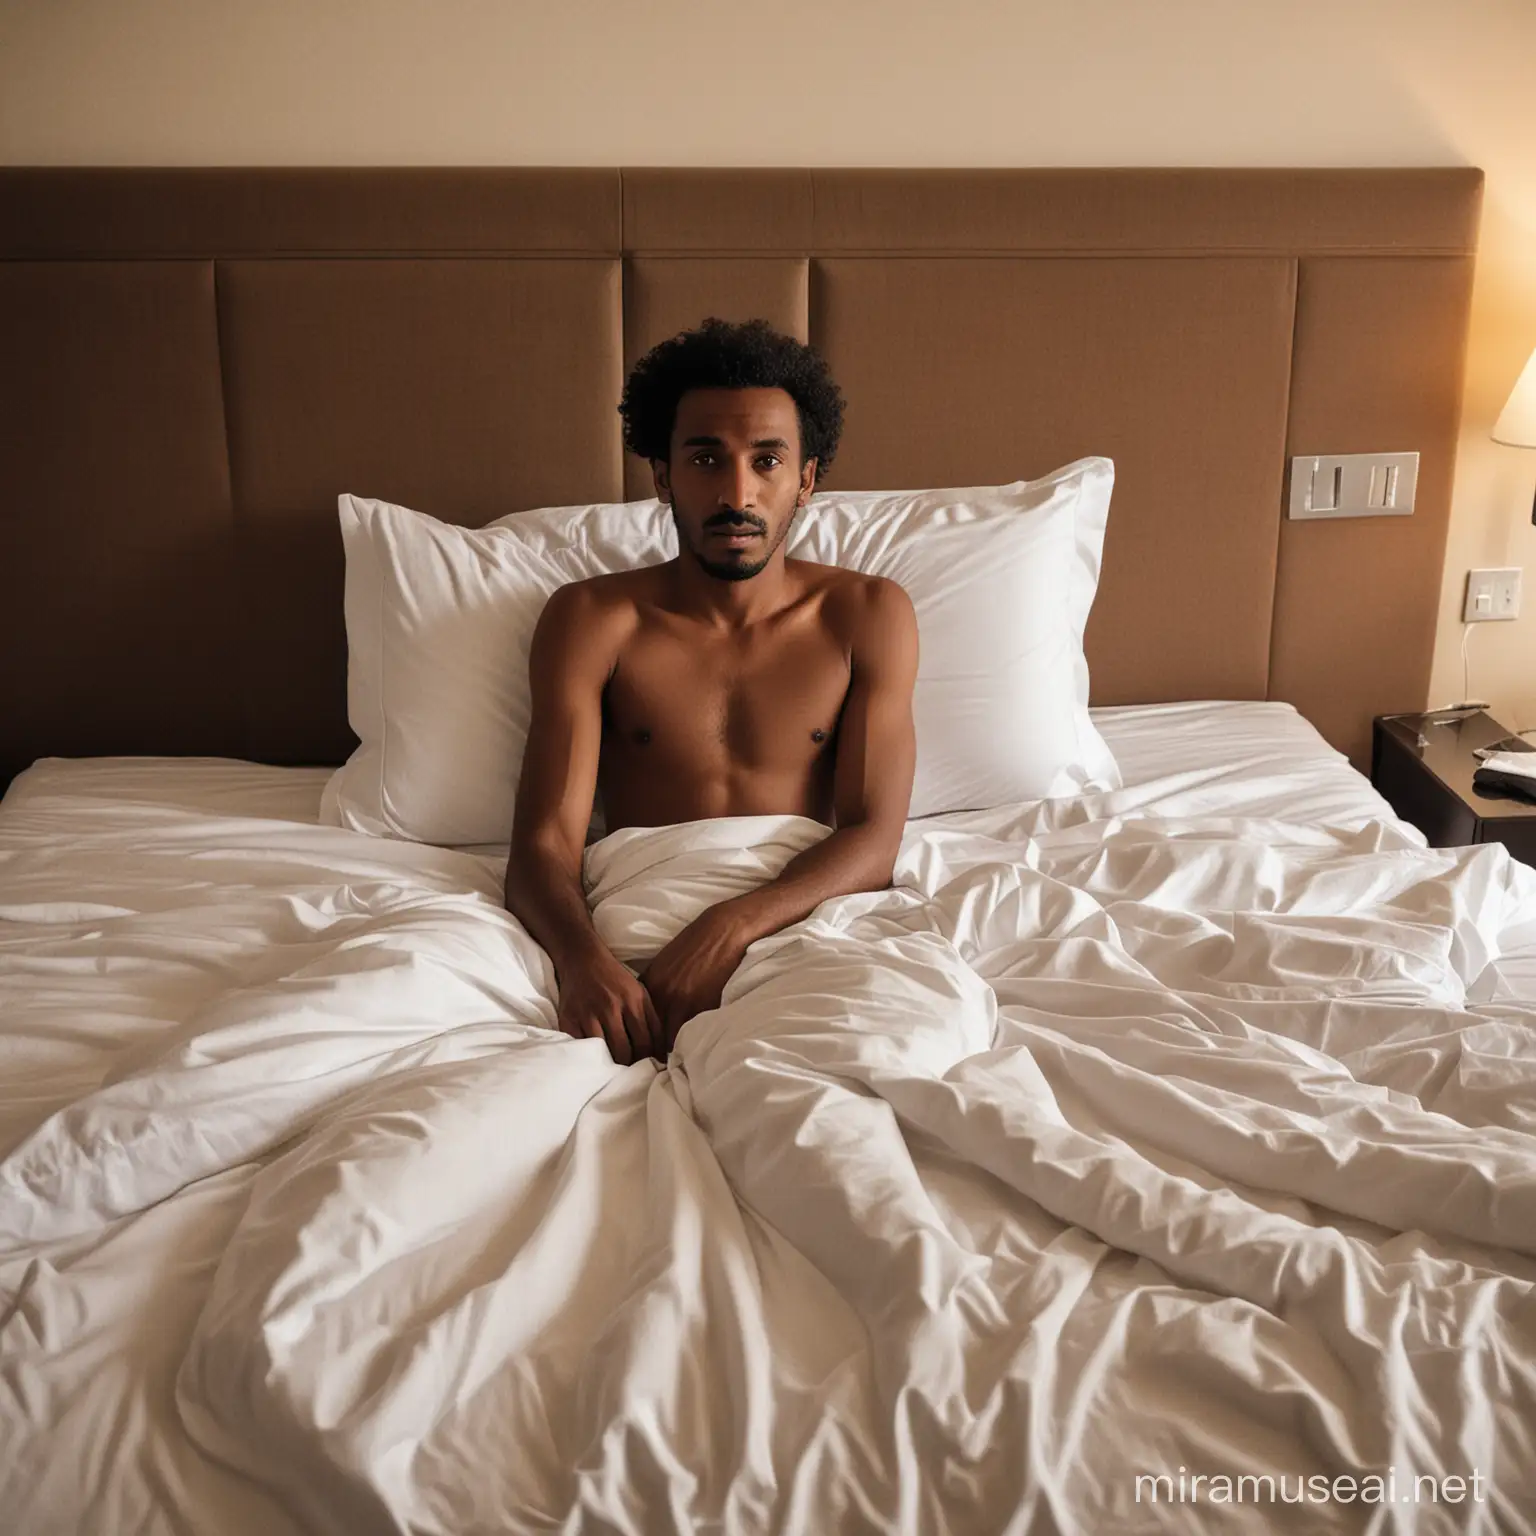 Eritrean man waking up in a hotel bed.
